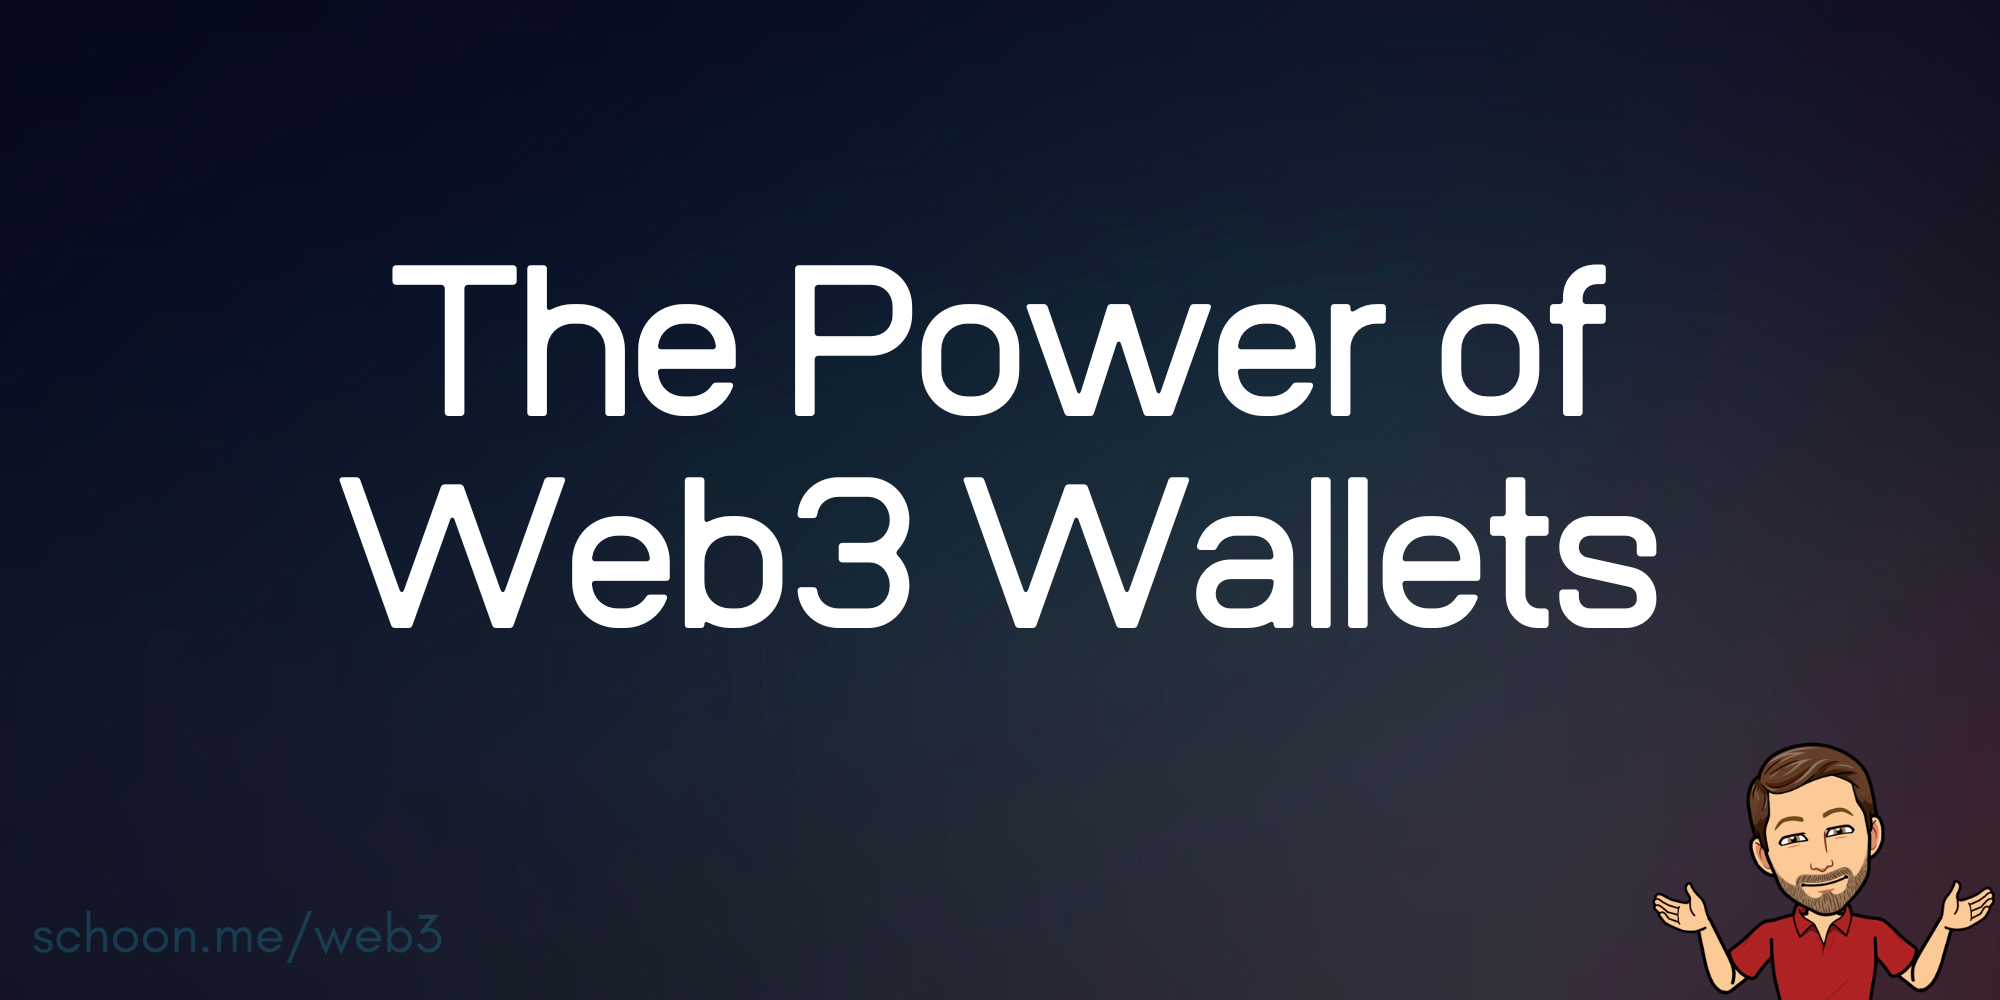 The Power of Web3 Wallets